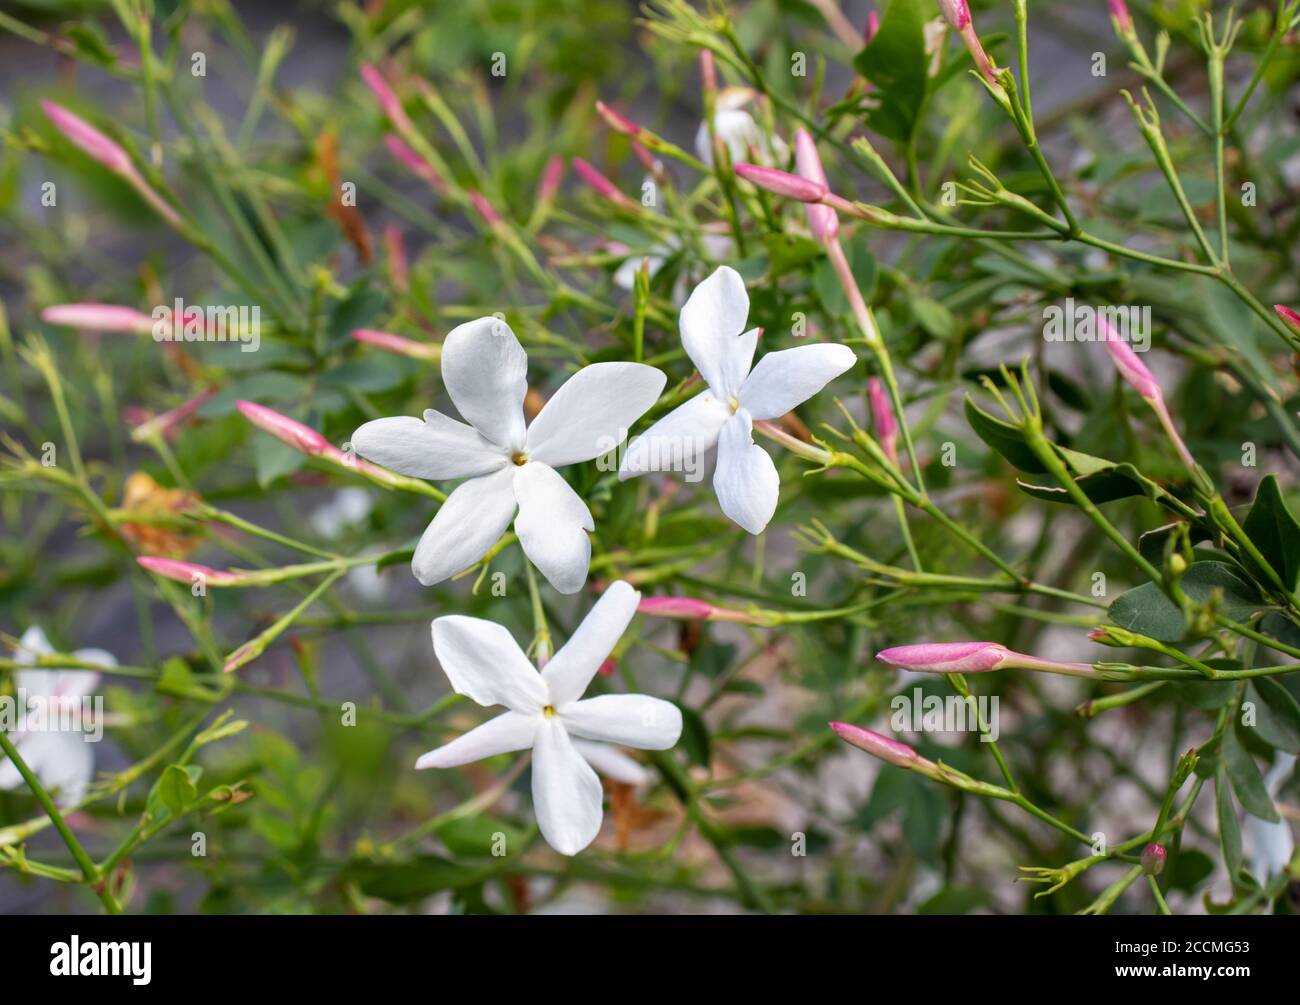 Common jasmine plant with flowers and buds closeup. Jasminum officinale. Stock Photo